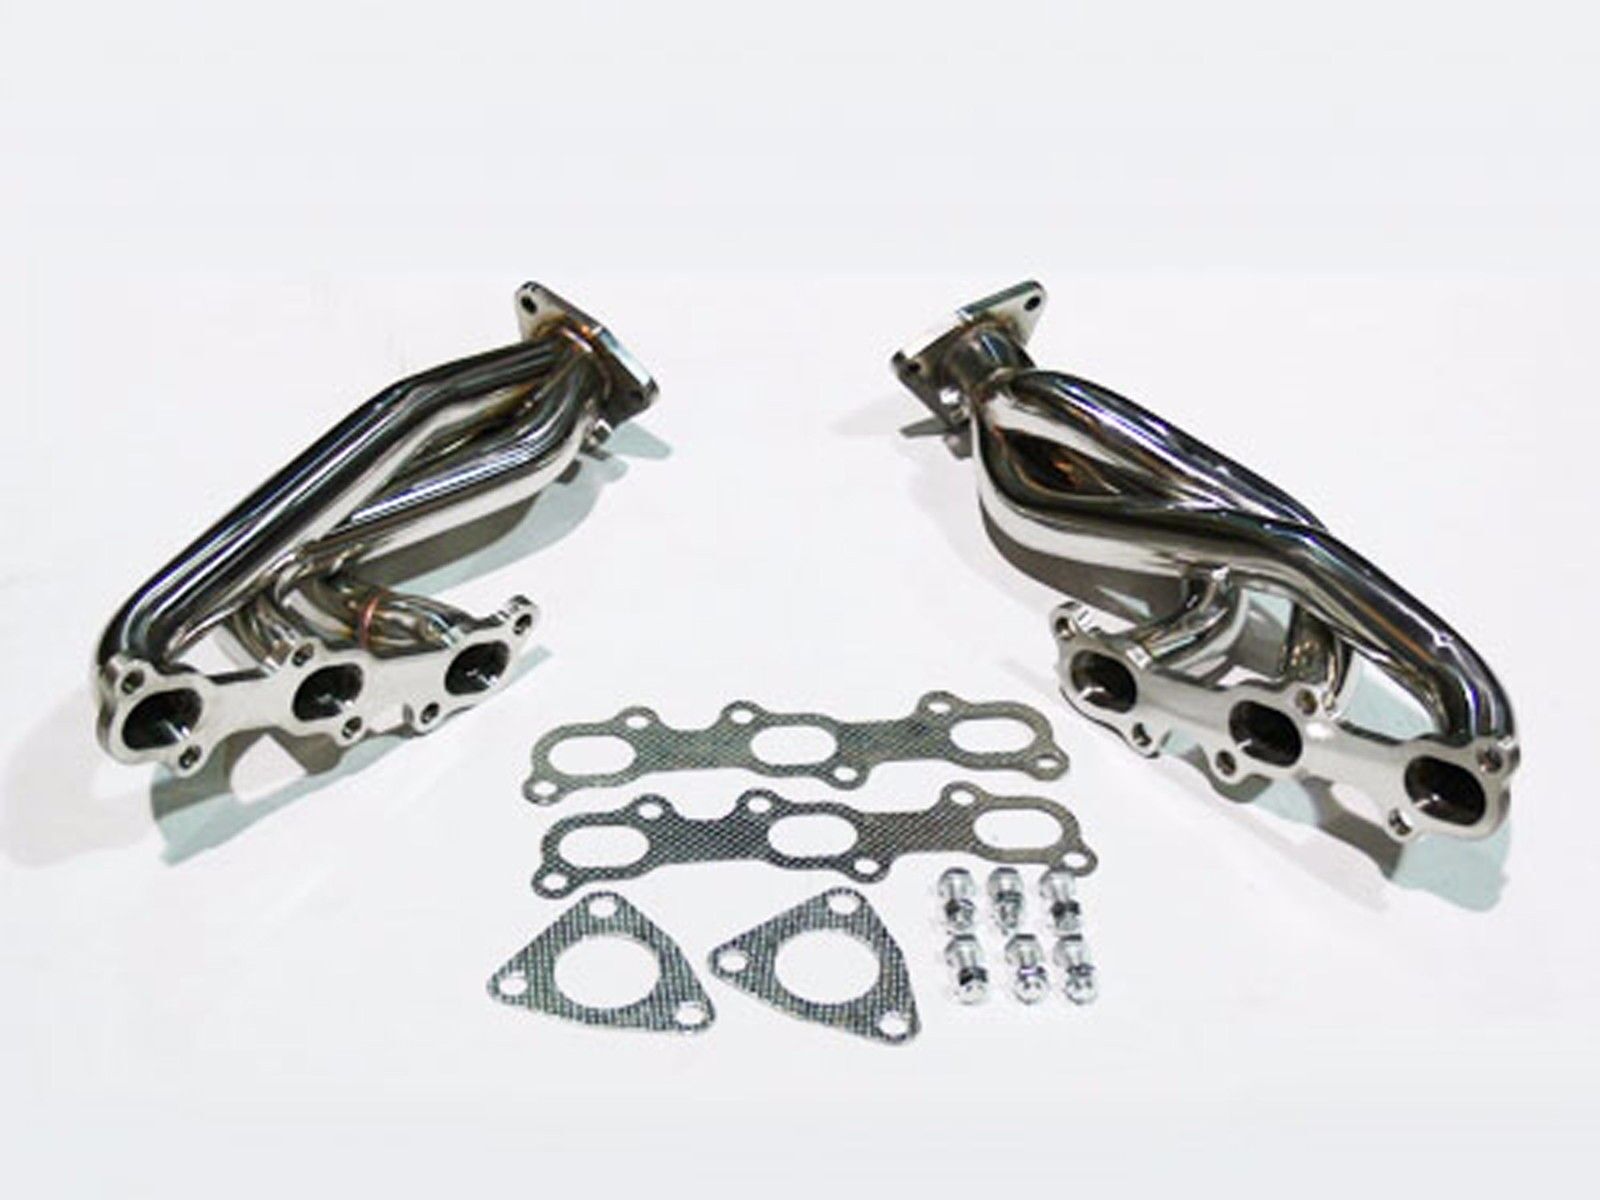 OBX RHD Only Header Fits Infiniti 2003 To 2007 G35 Coupe 2003 To 2006 G35 Sedan